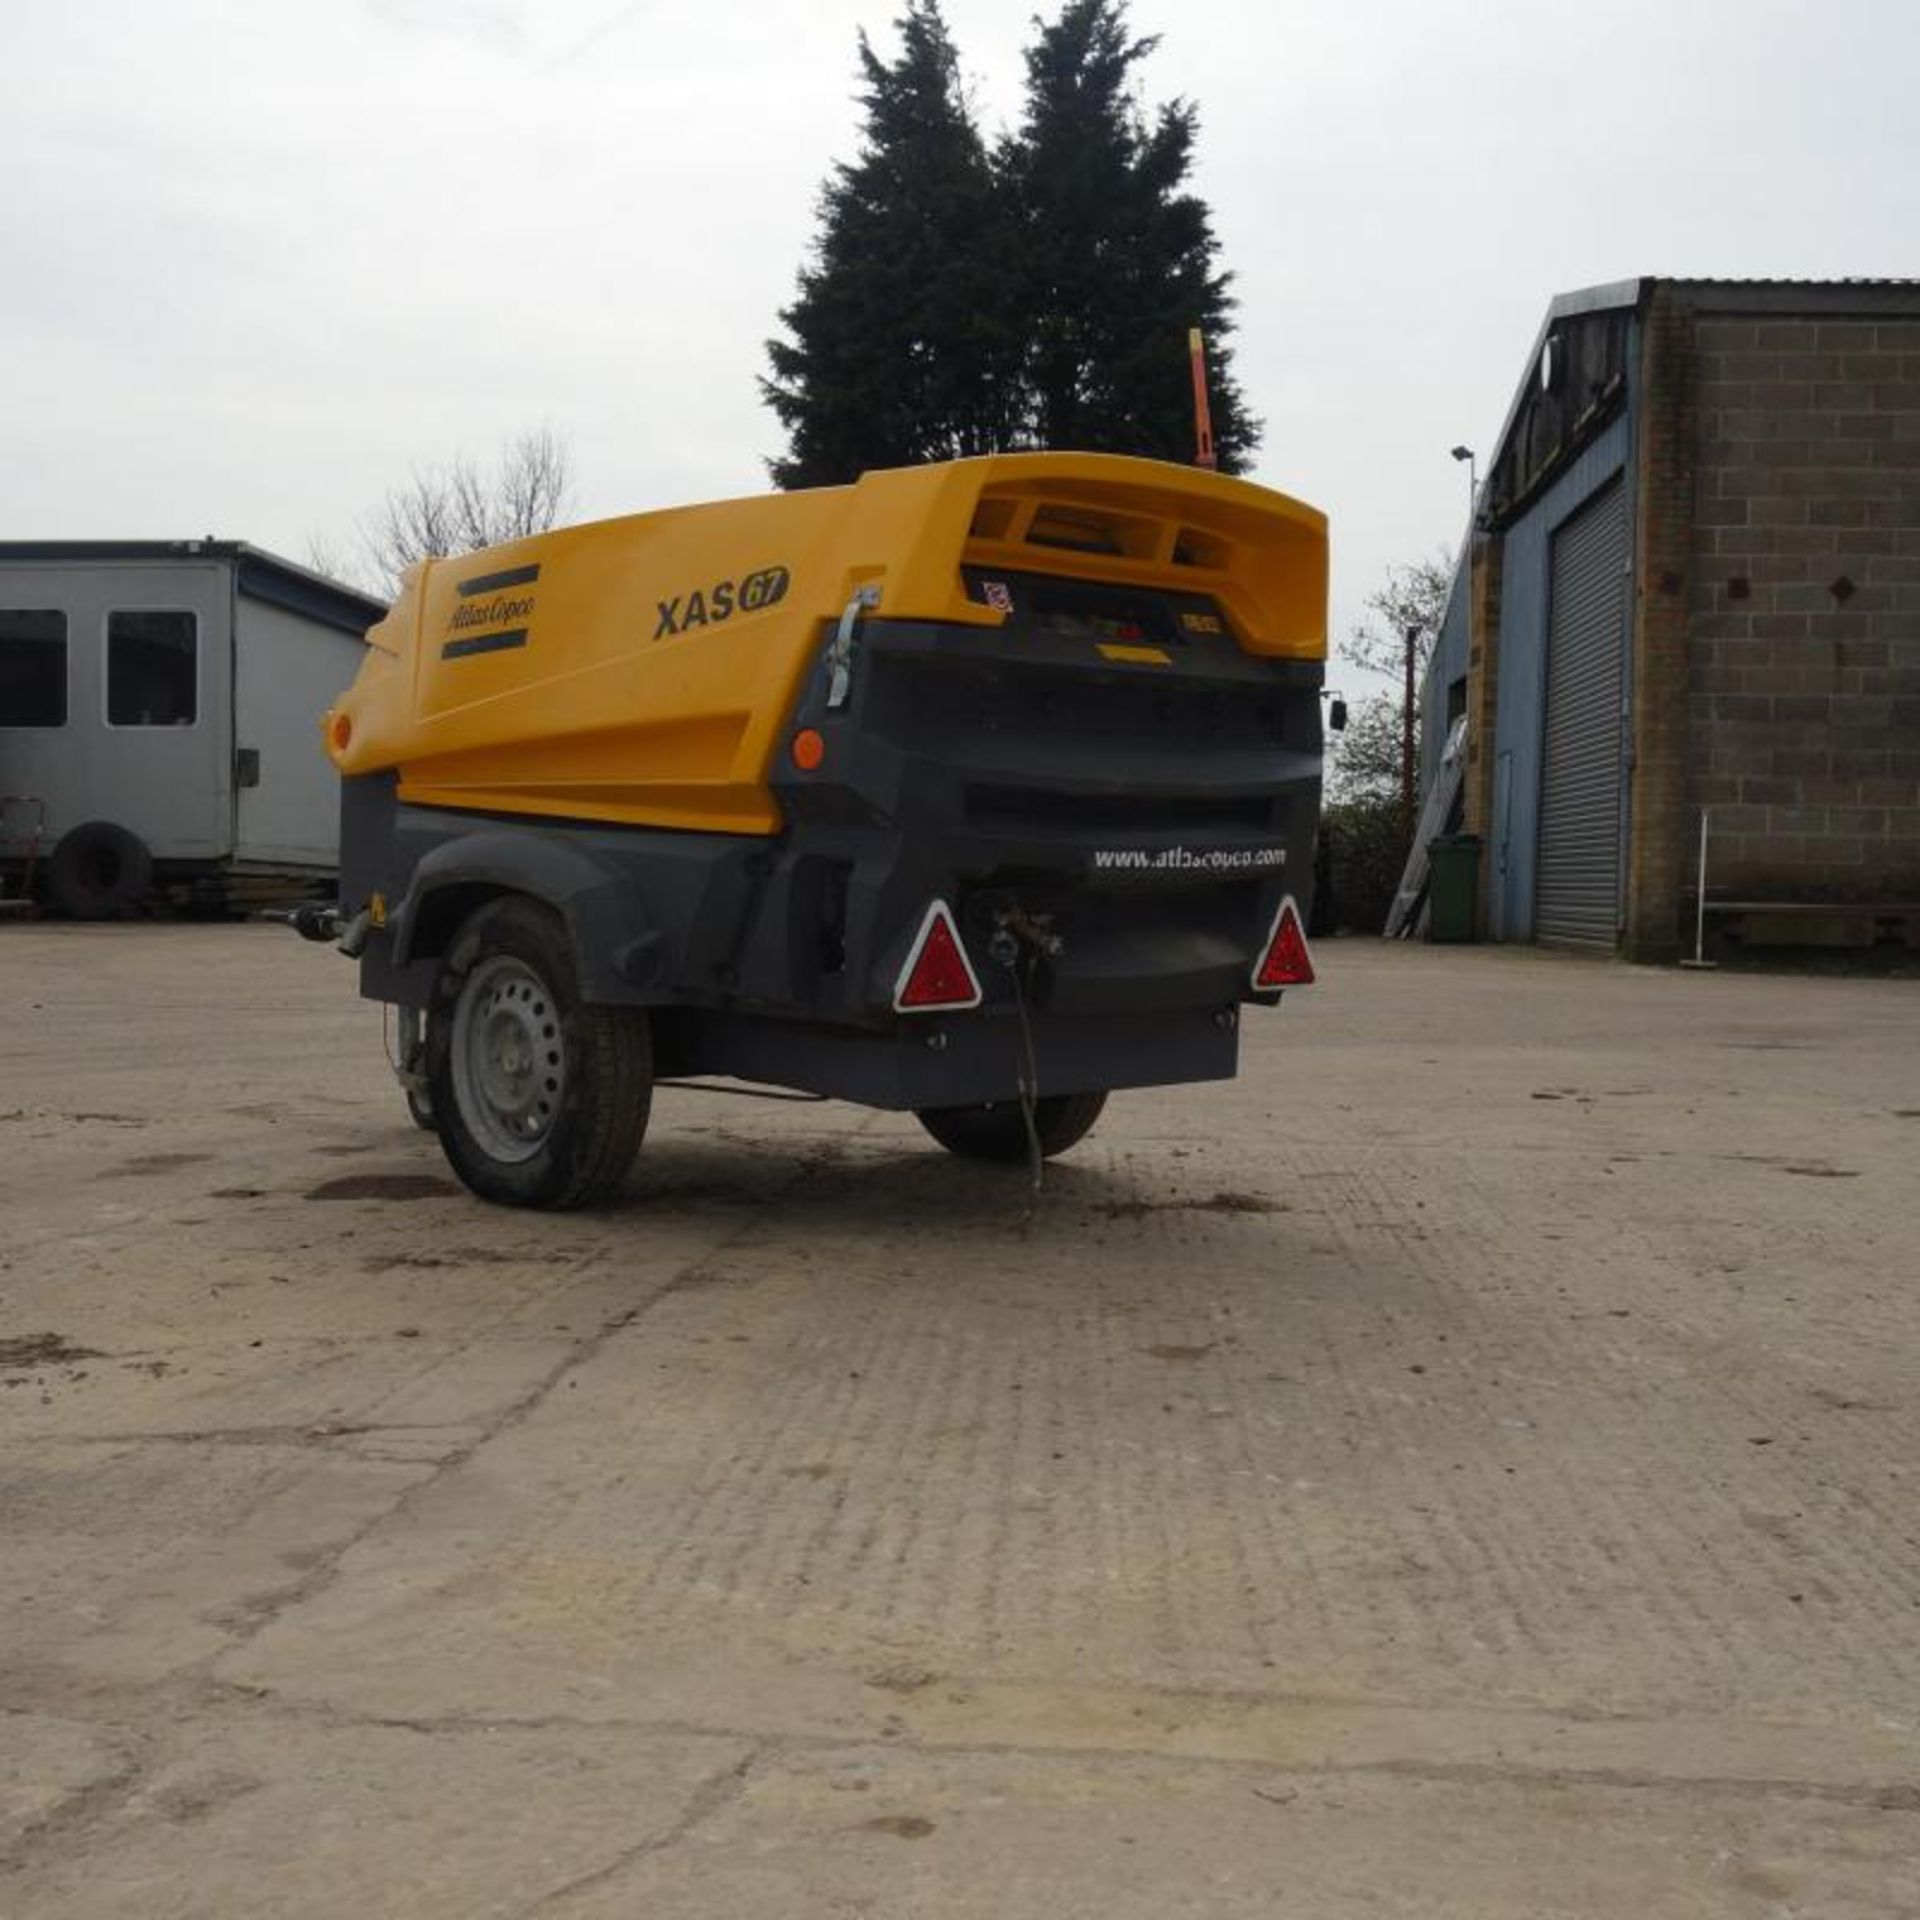 2015 Atlas Copco Xas 67 Compressor, 936 Hours From New - Image 5 of 9